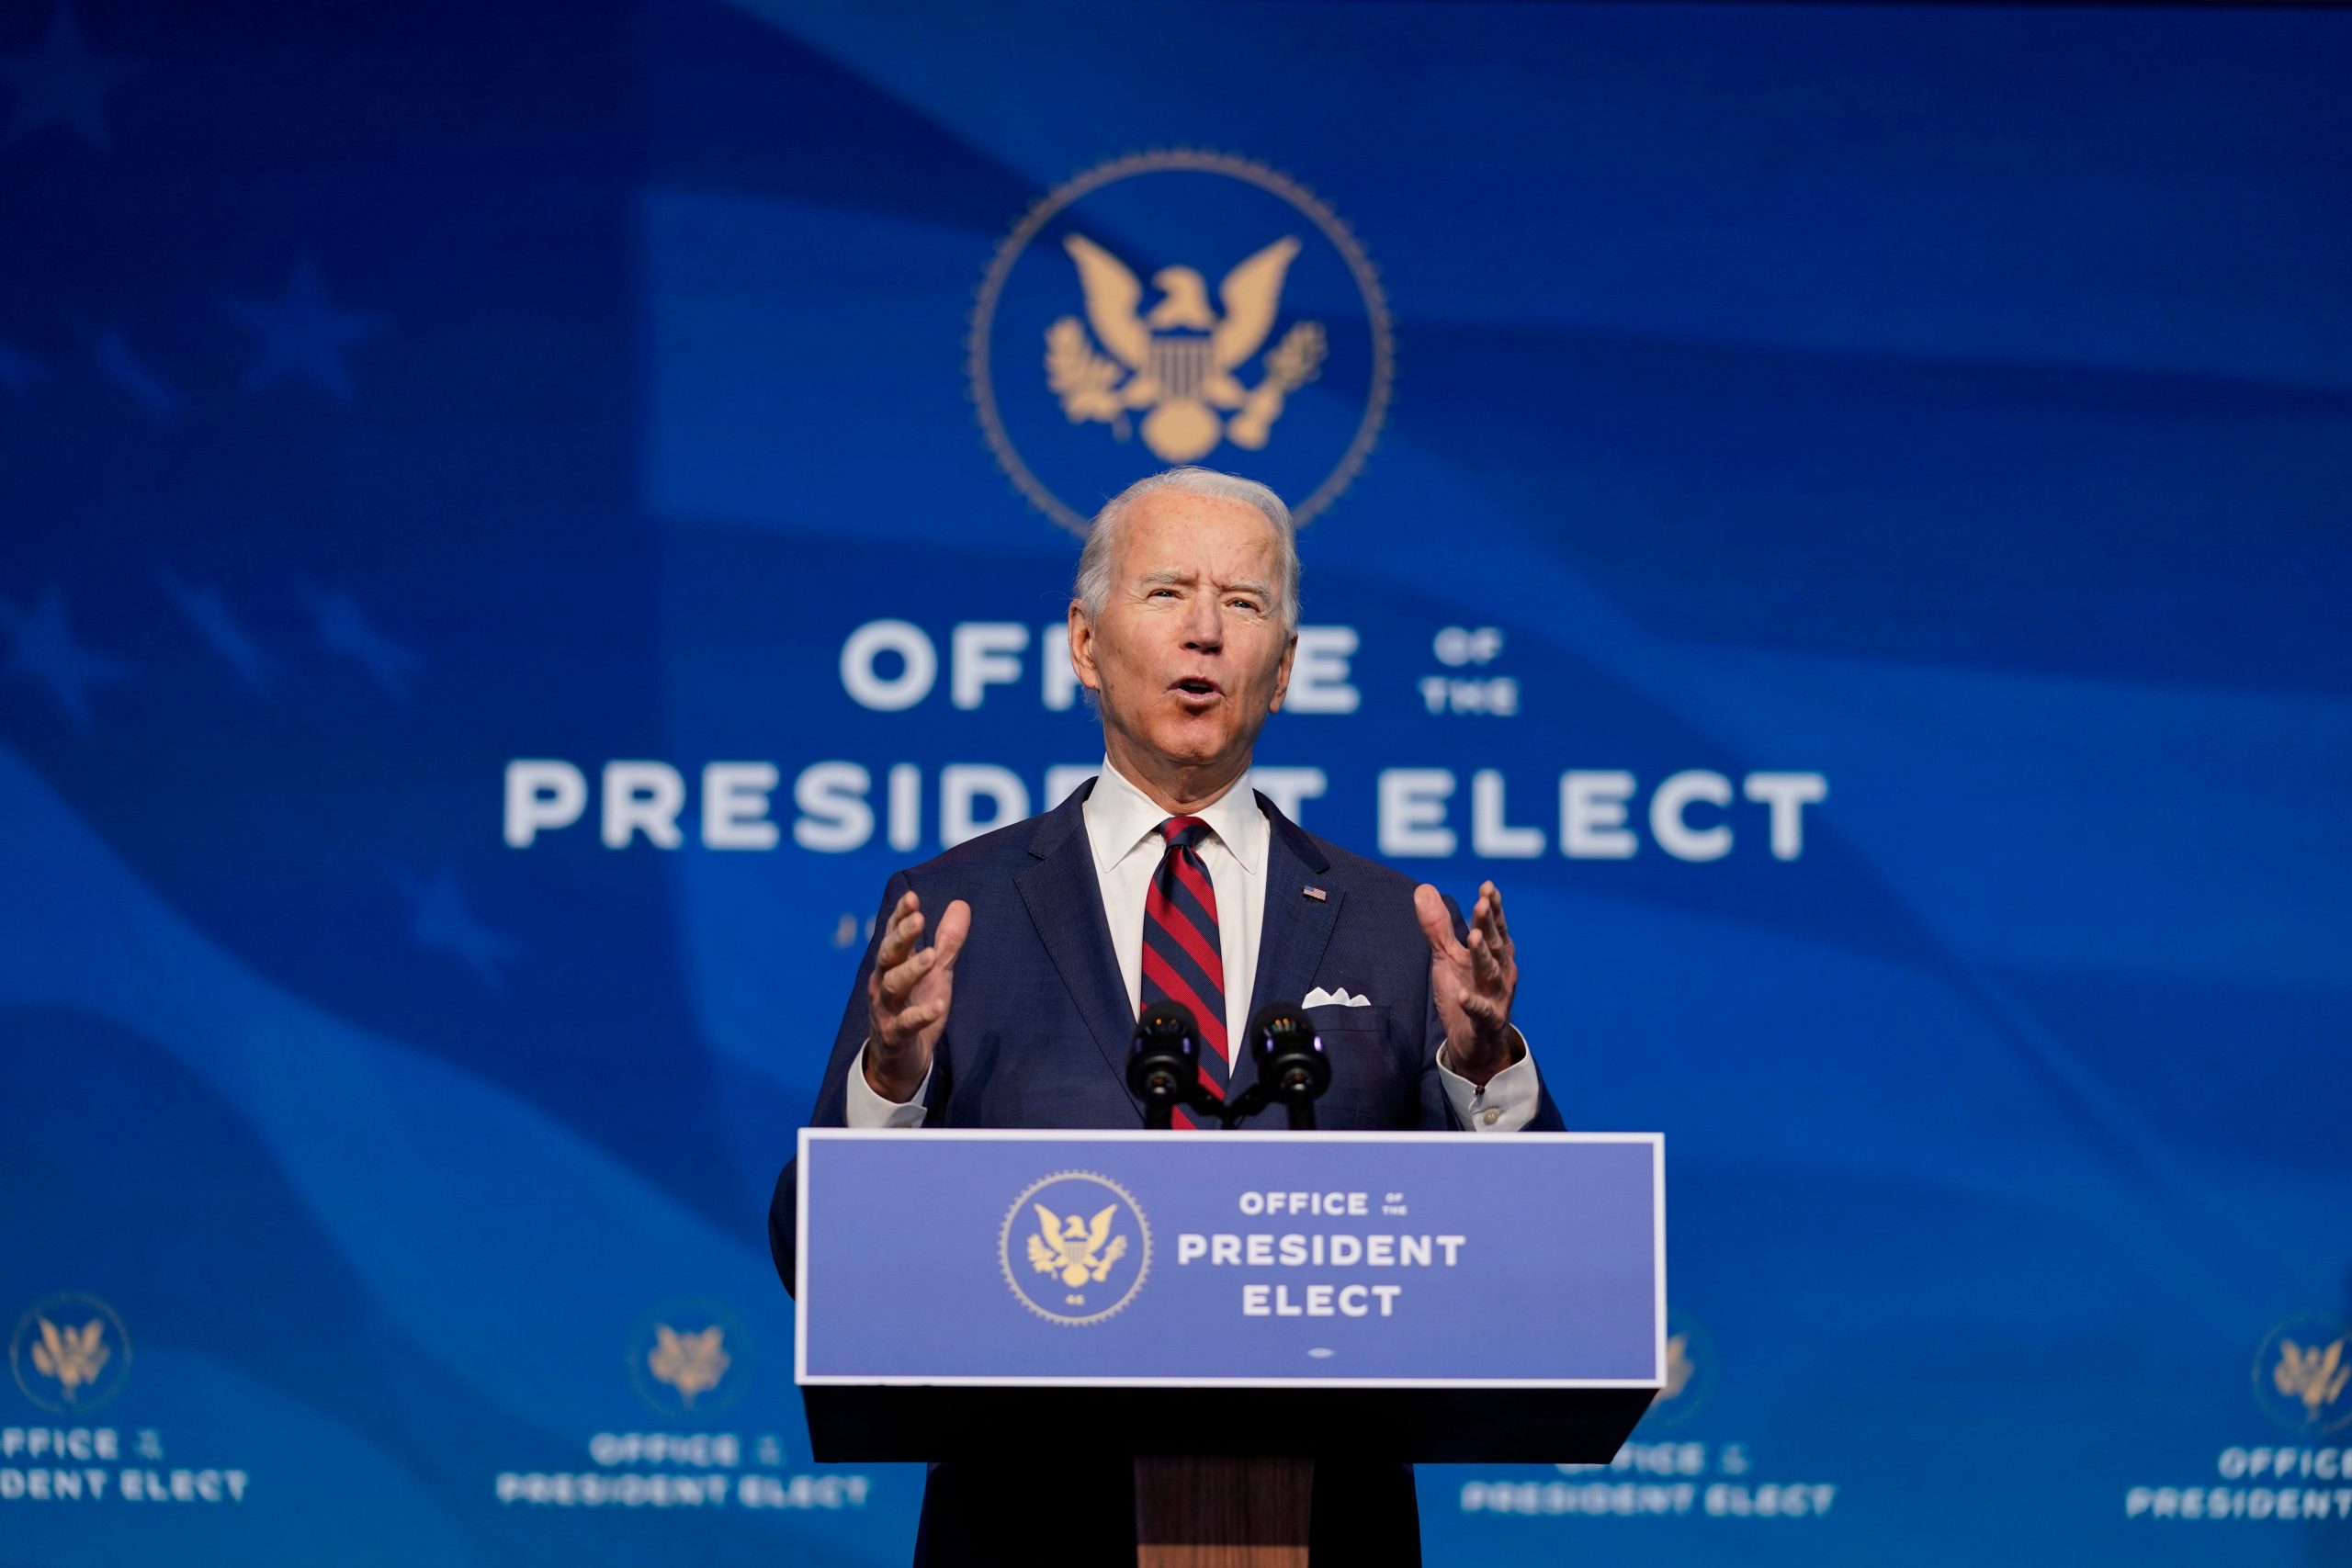 Joe Biden warns of ‘devastating consequences’ if COVID relief package delayed